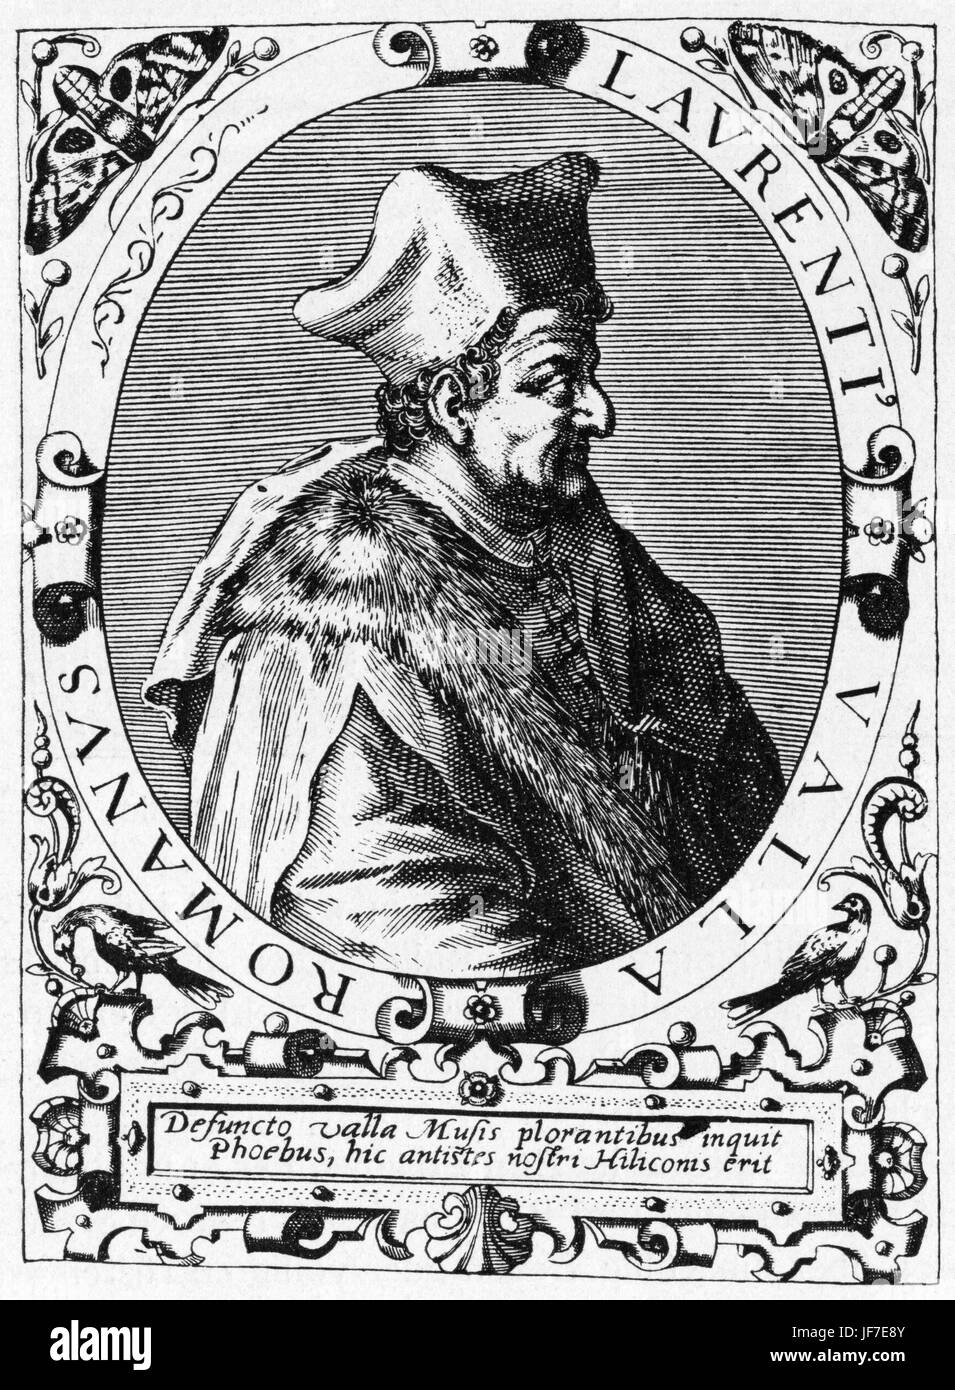 Lorenzo Valla - portrait of the Italian humanist, rhetorician, and educator. Engraving with a decorative border of moths, birds and plants. 1406 - 1457. Stock Photo